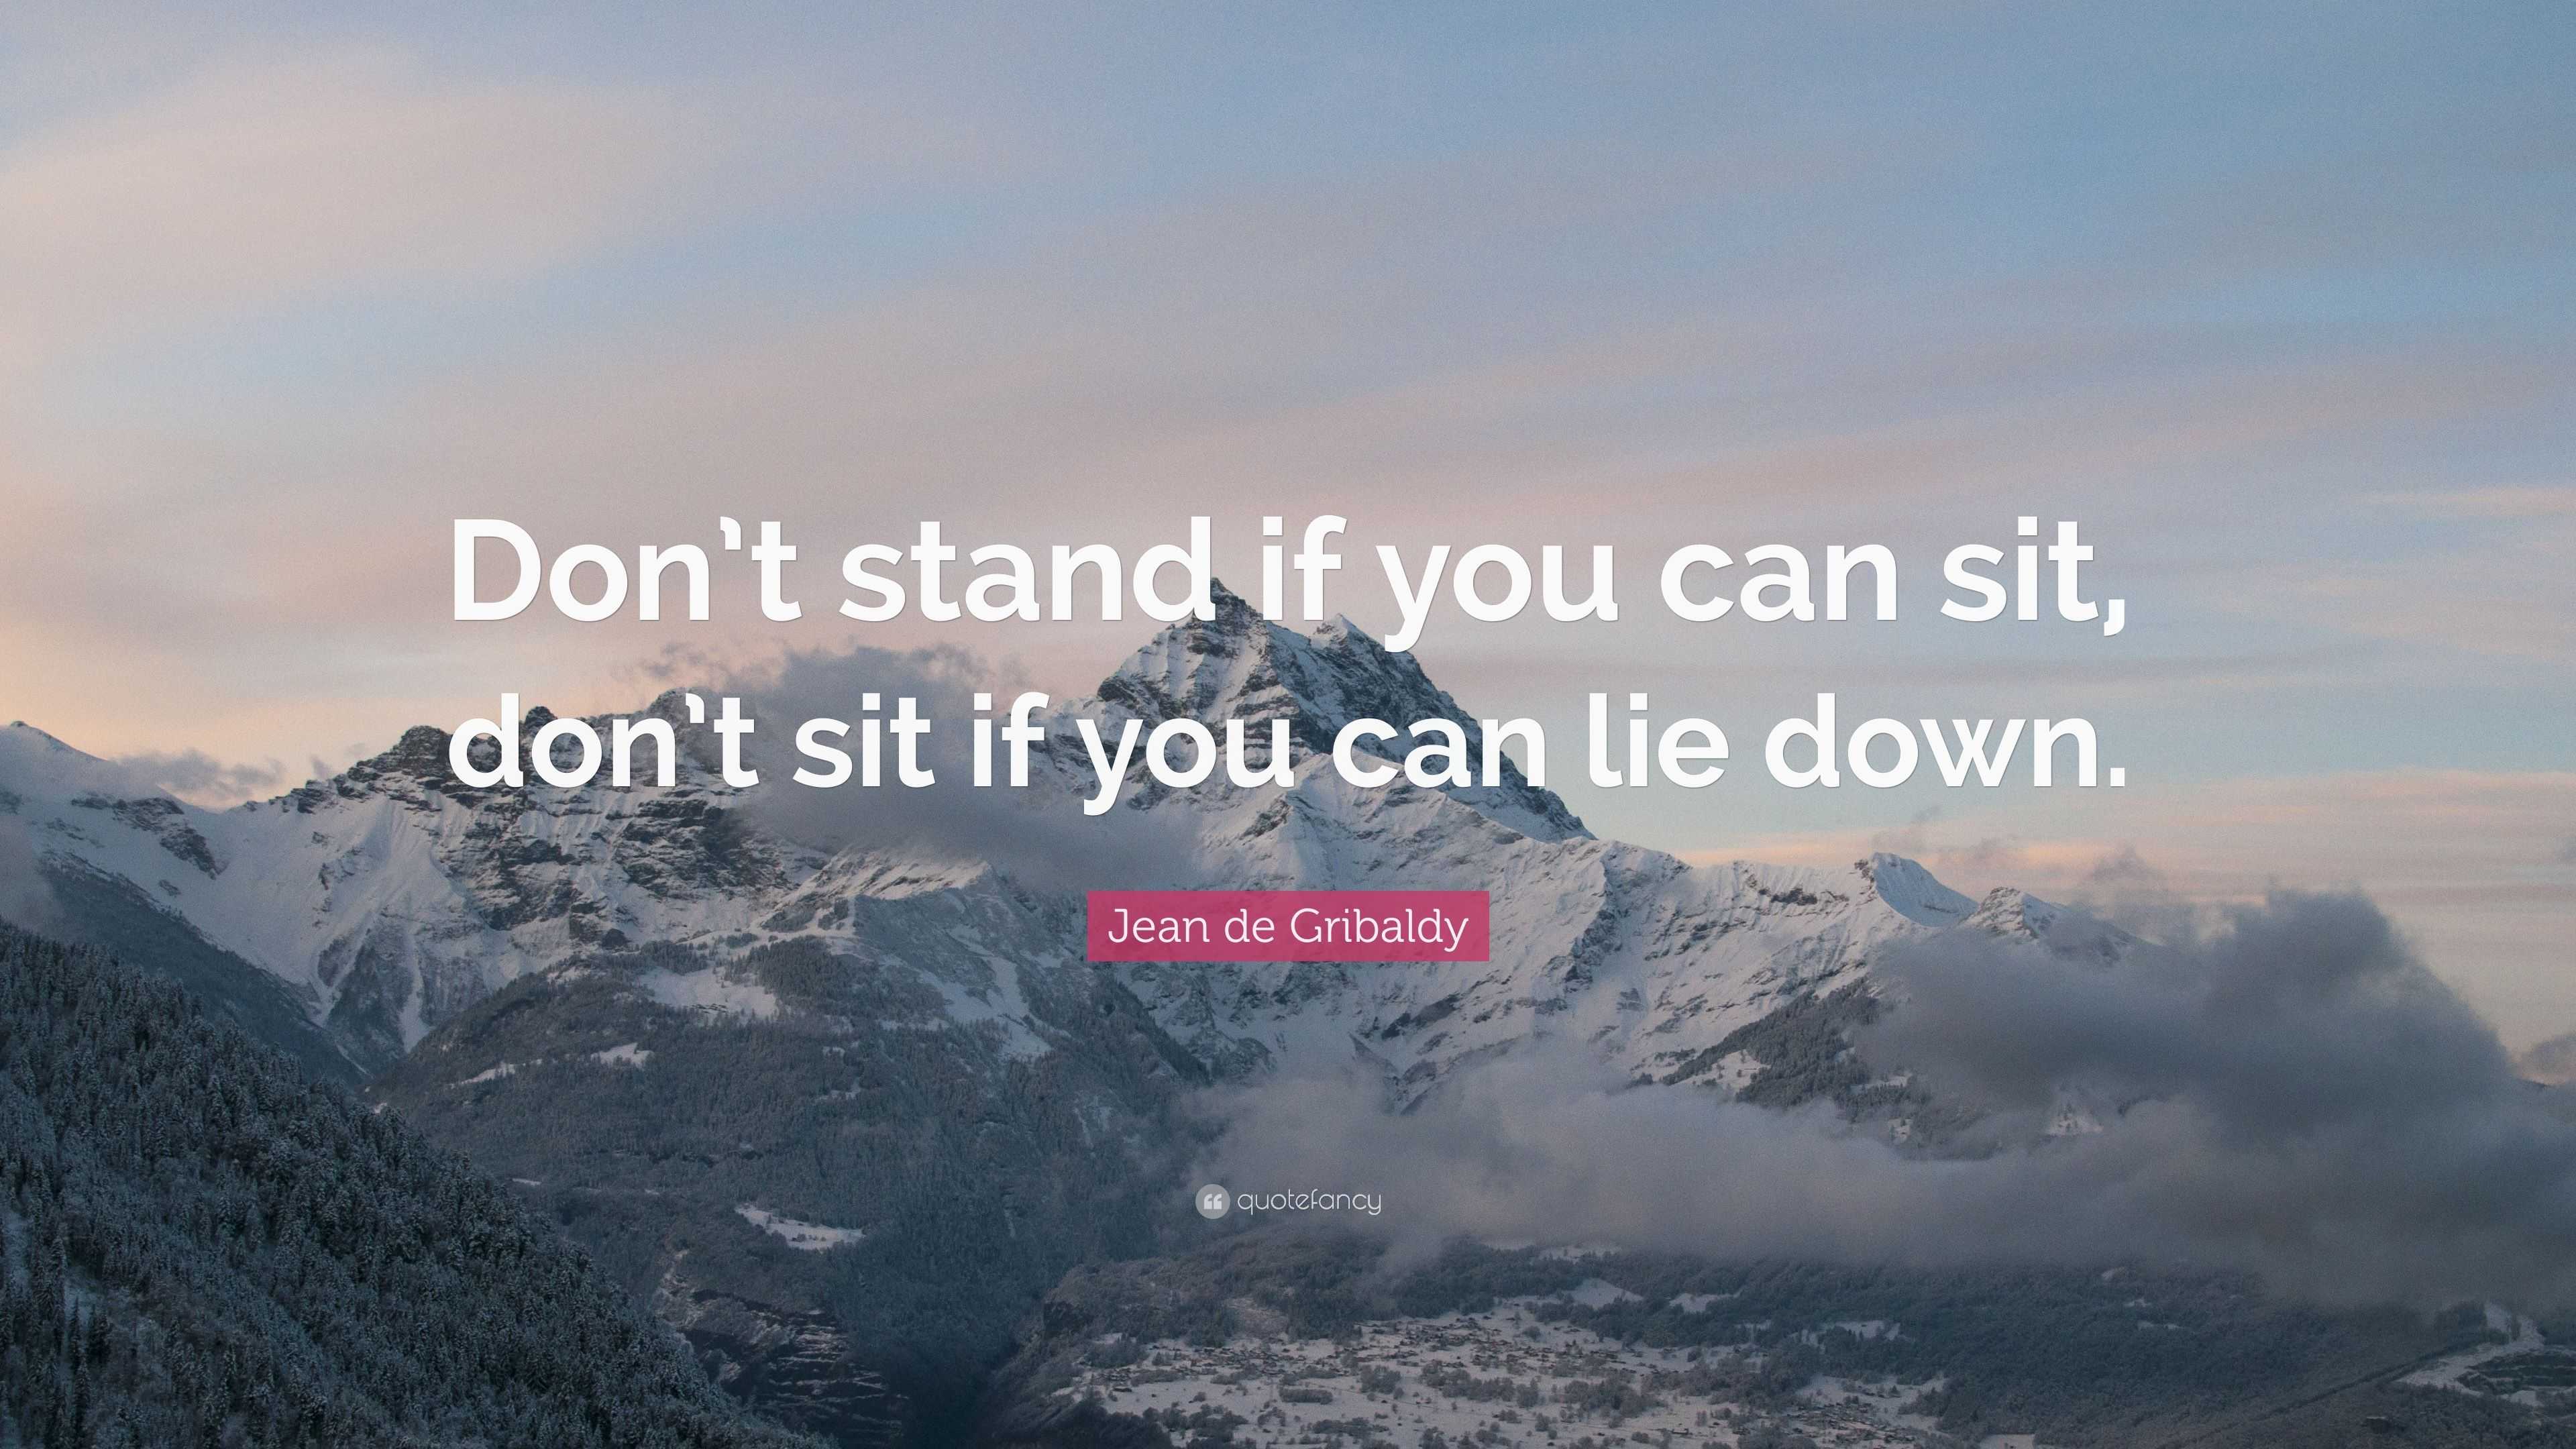 https://quotefancy.com/media/wallpaper/3840x2160/3224371-Jean-de-Gribaldy-Quote-Don-t-stand-if-you-can-sit-don-t-sit-if-you.jpg